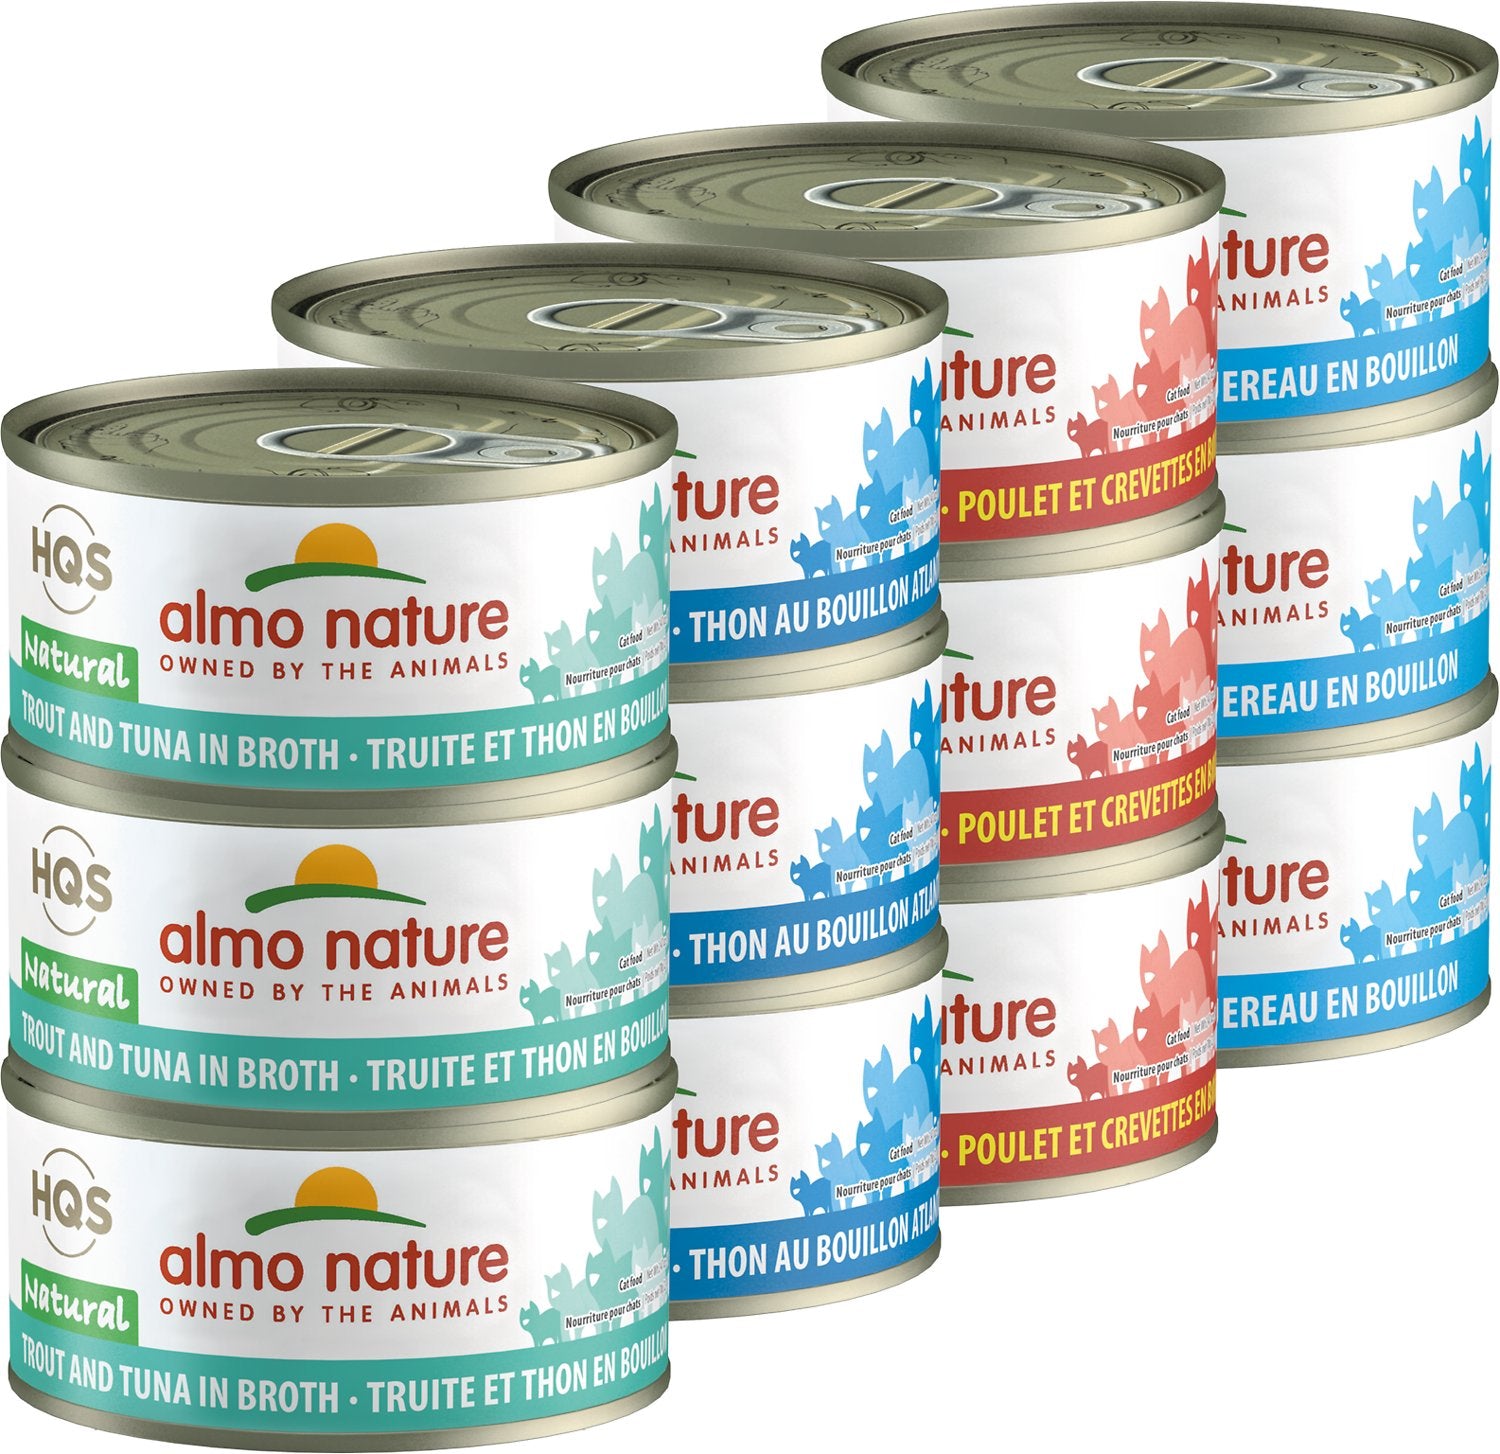 Almo Nature | Wet Cat Food | HQS Natural Tuna, Mackerel, Chicken & Shrimp, Trout & Tuna Variety Pack | ARMOR THE POOCH